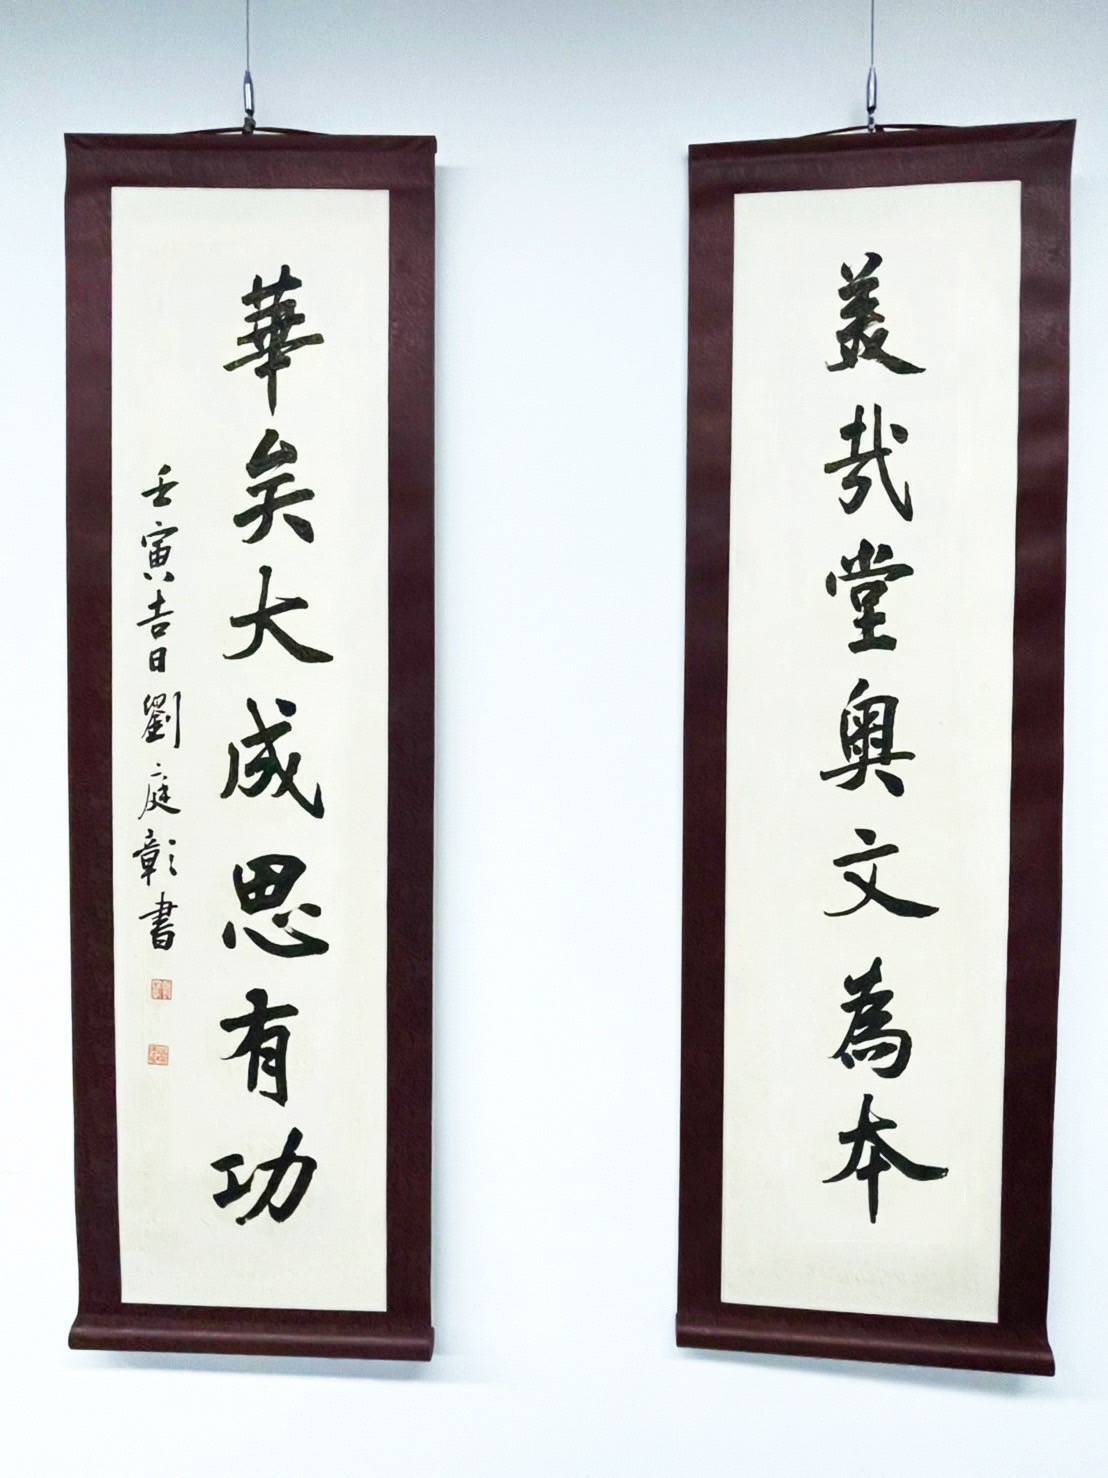 NCKU gifts AU a Chinese couplet celebrating the opening of the AU-NCKU Taiwan Center of Chinese Language and Culture Director. The couplet incorporates the two university’s names in Chinese.